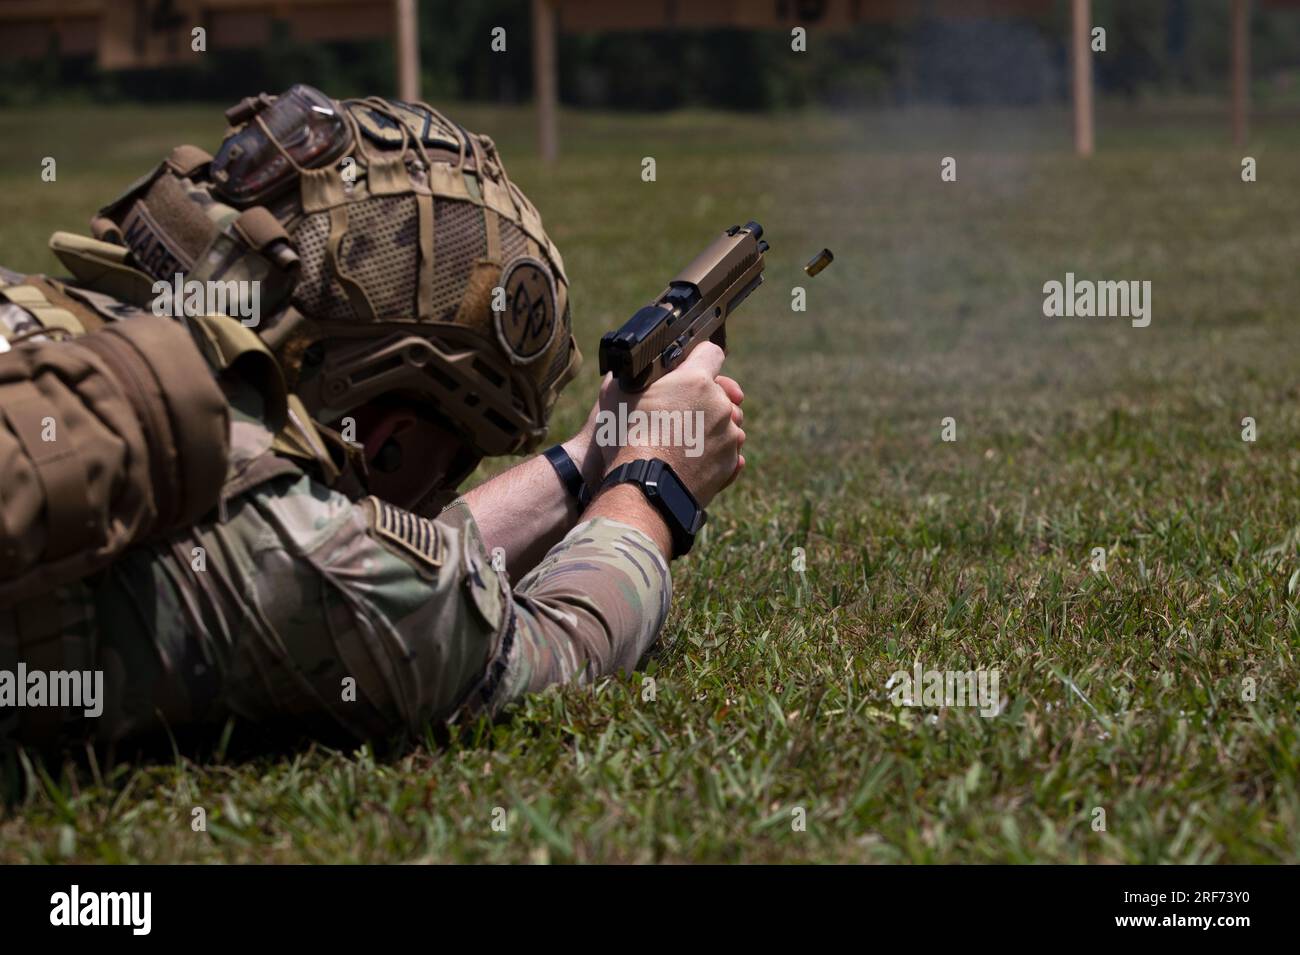 U.S. Army National Guard Sgt. Matthew Marek, a member of the 268th Military Police Command, fires from the prone position during the Tennessee's Adjujant General's pistol competition at VTS Tullahoma, Tennessee on July 28th 2023. The pistol competition involves precision while changing magazines and changing positions in a specific timed sequence. (U.S. Army National Guard photo by Staff Sergeant Ryan S. Gay) Stock Photo